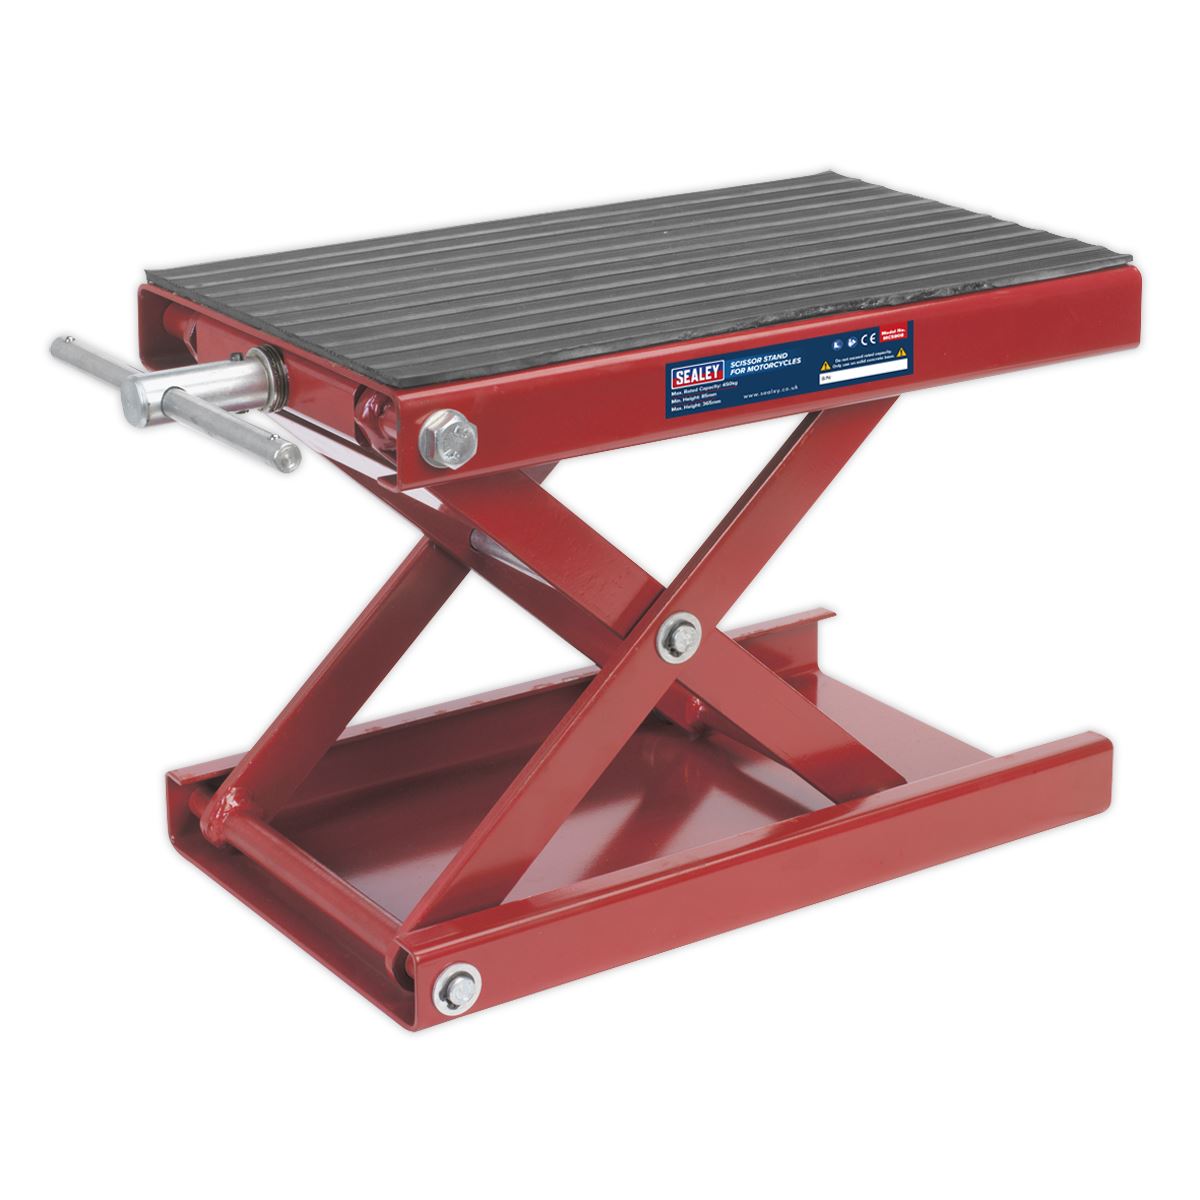 Sealey Motorcycle Scissor Stand 450kg Capacity